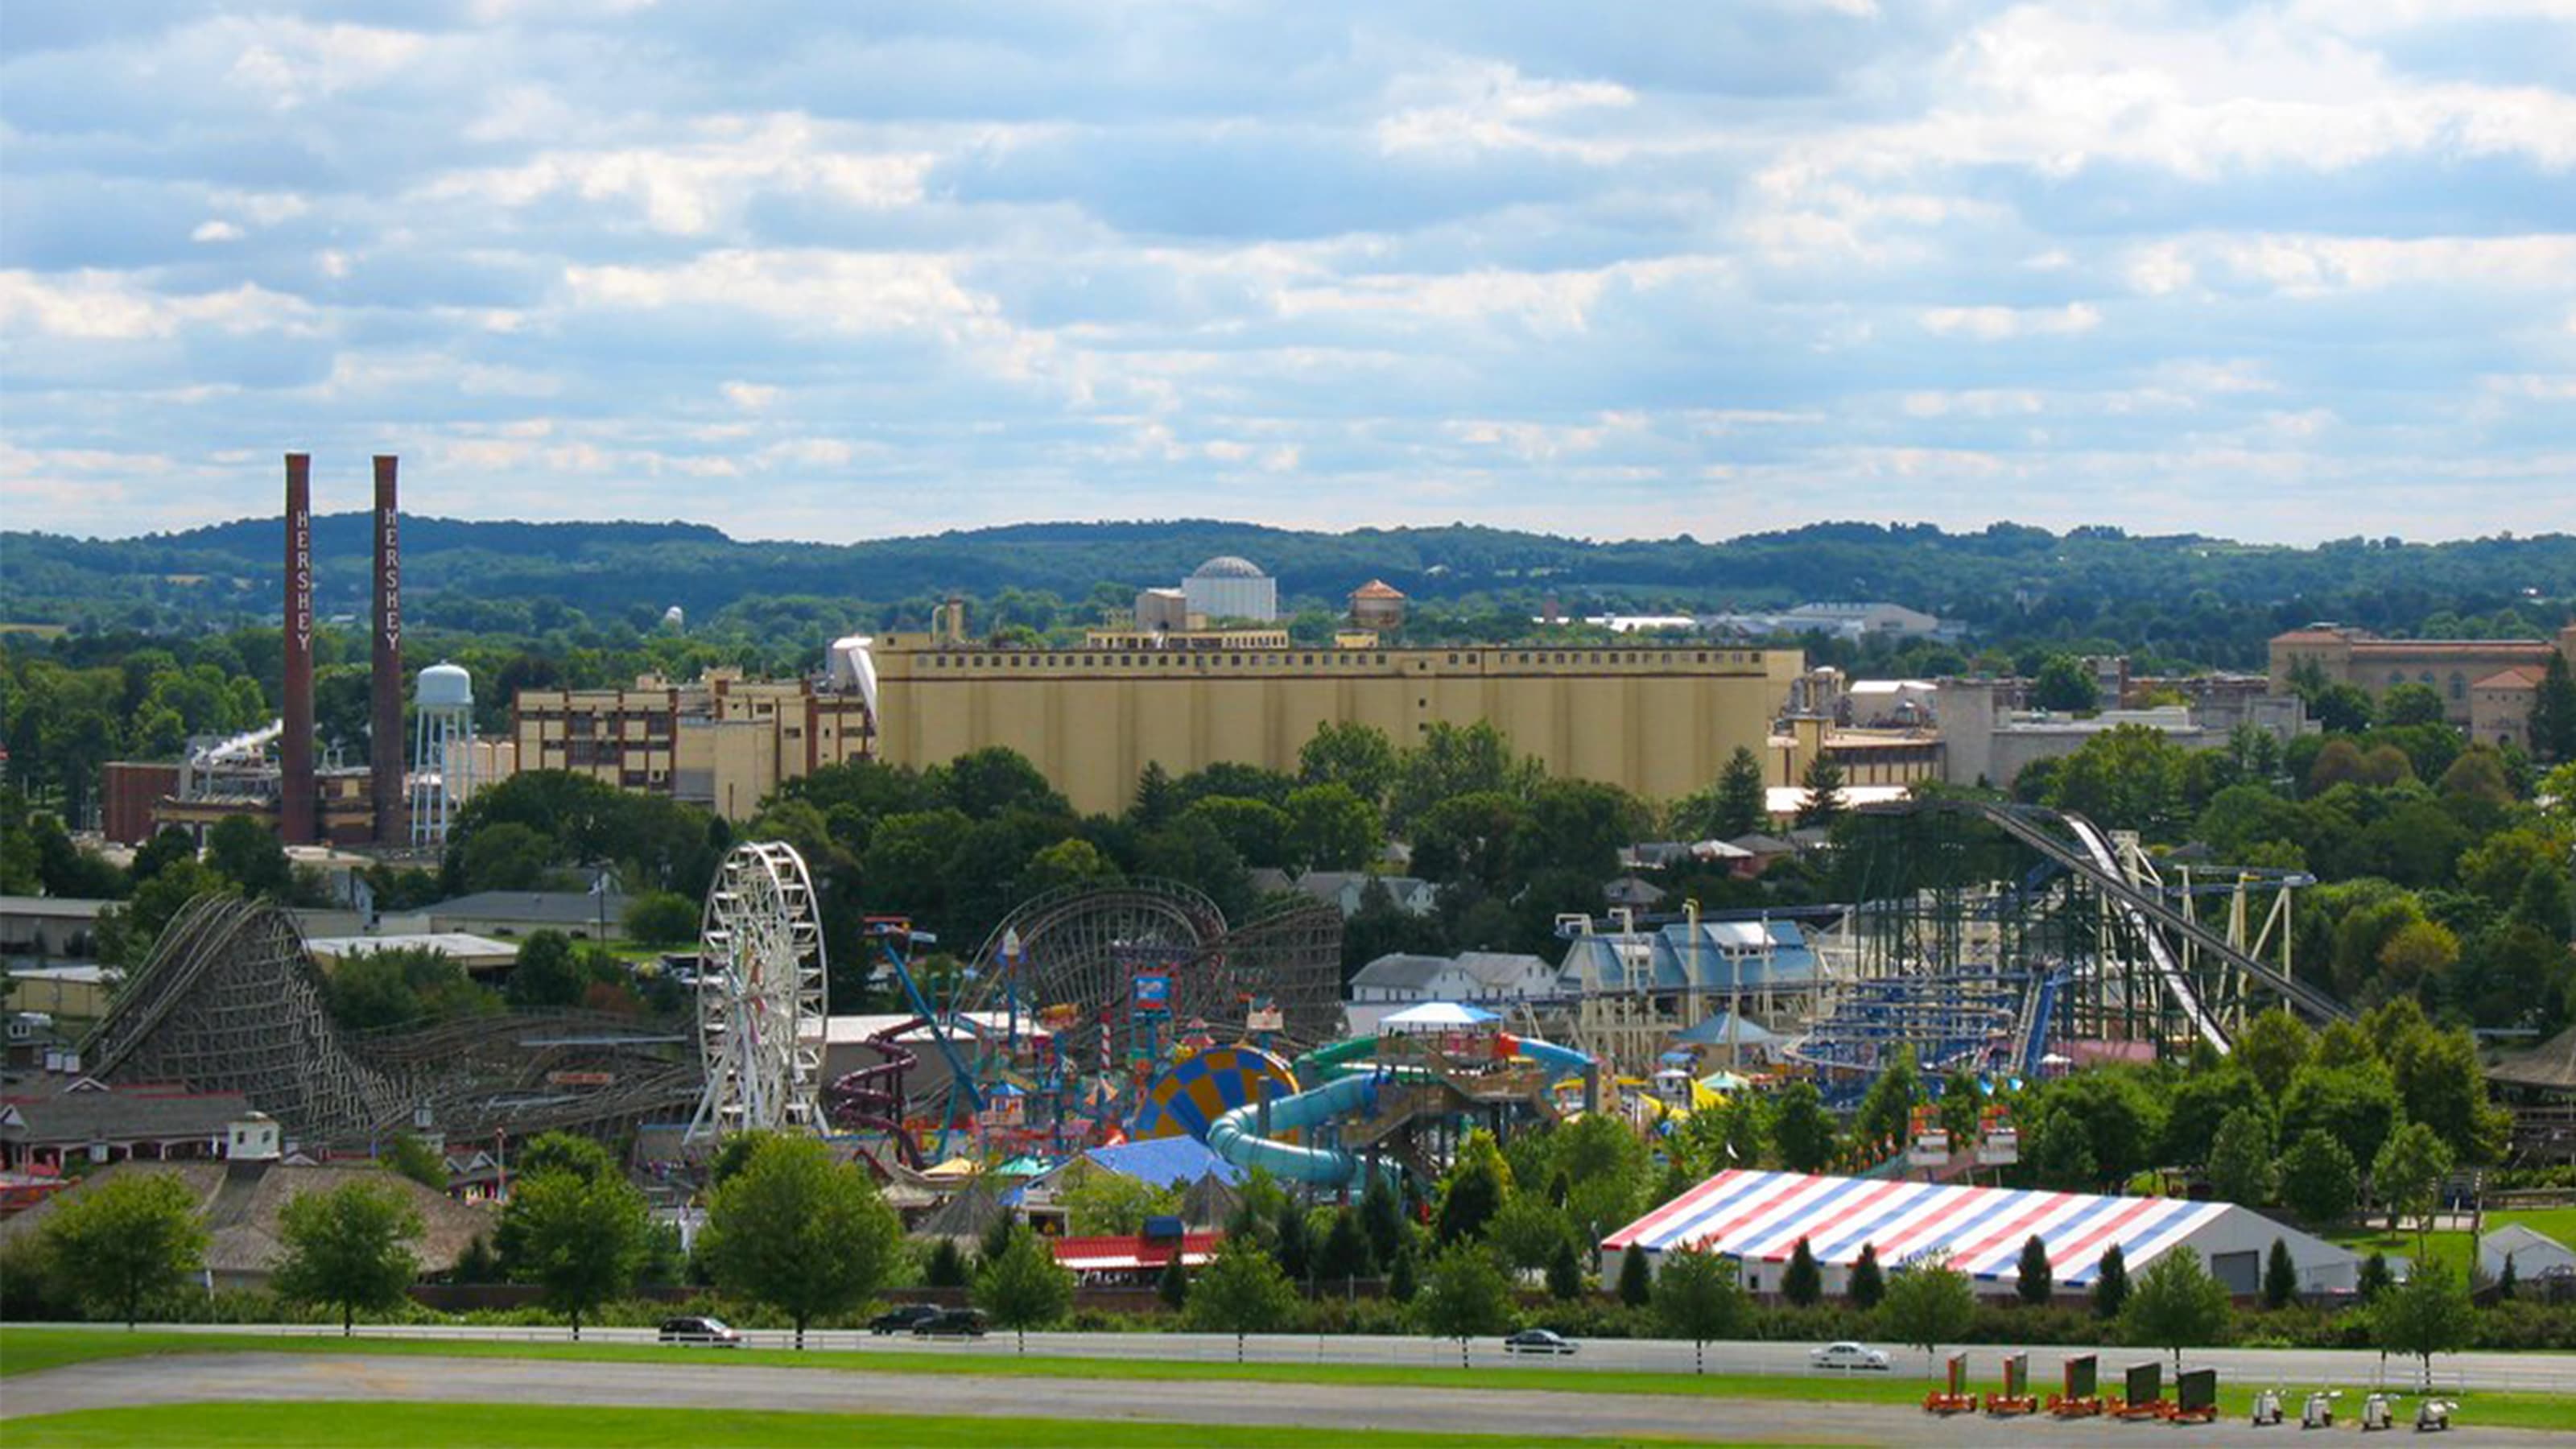 Hershey amusement park, featuring roller coasters and ferris wheel.